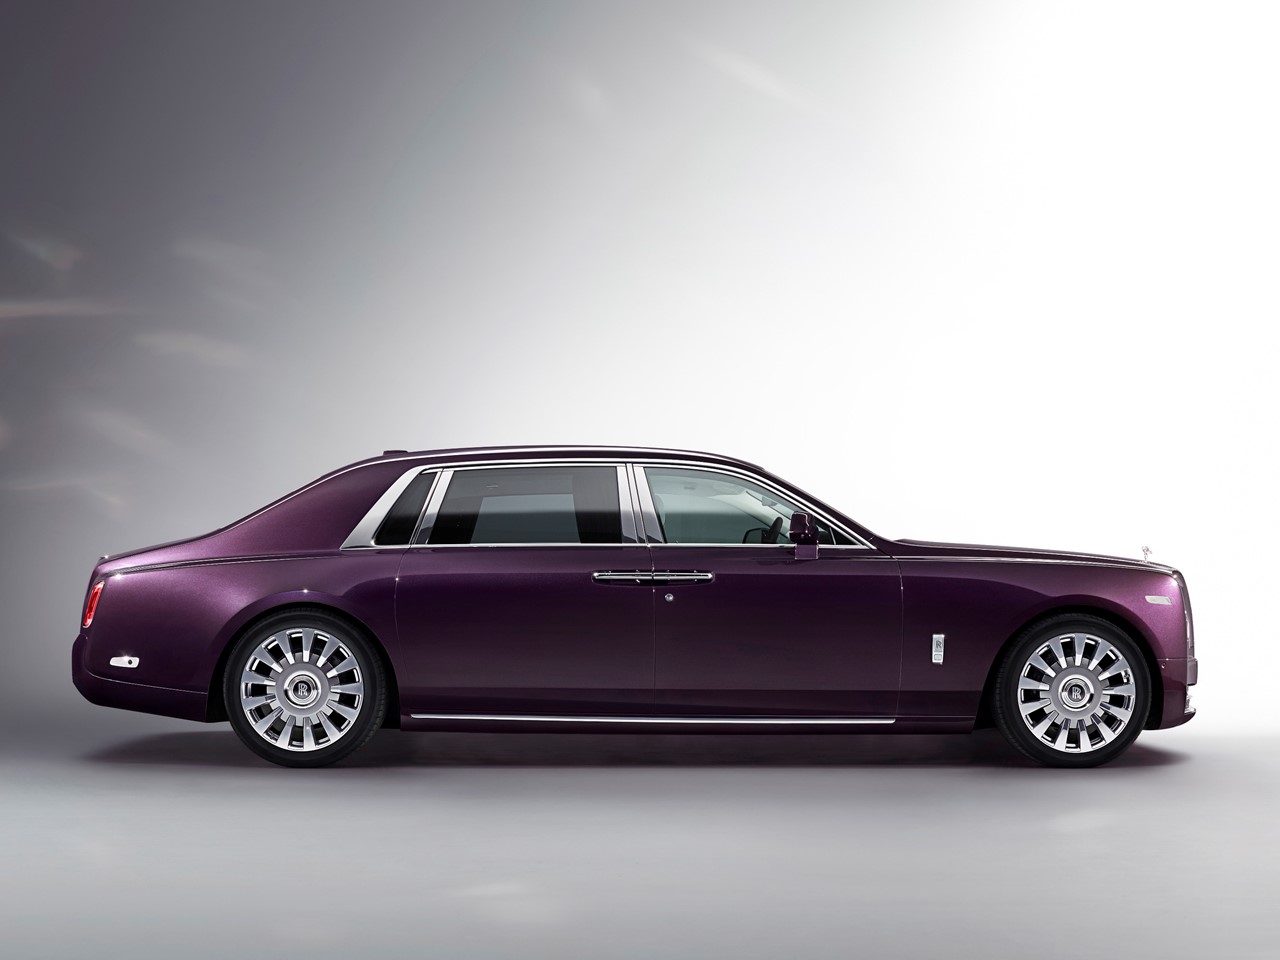 2018 RollsRoyce Phantom VIII Dissected  Feature  Car and Driver